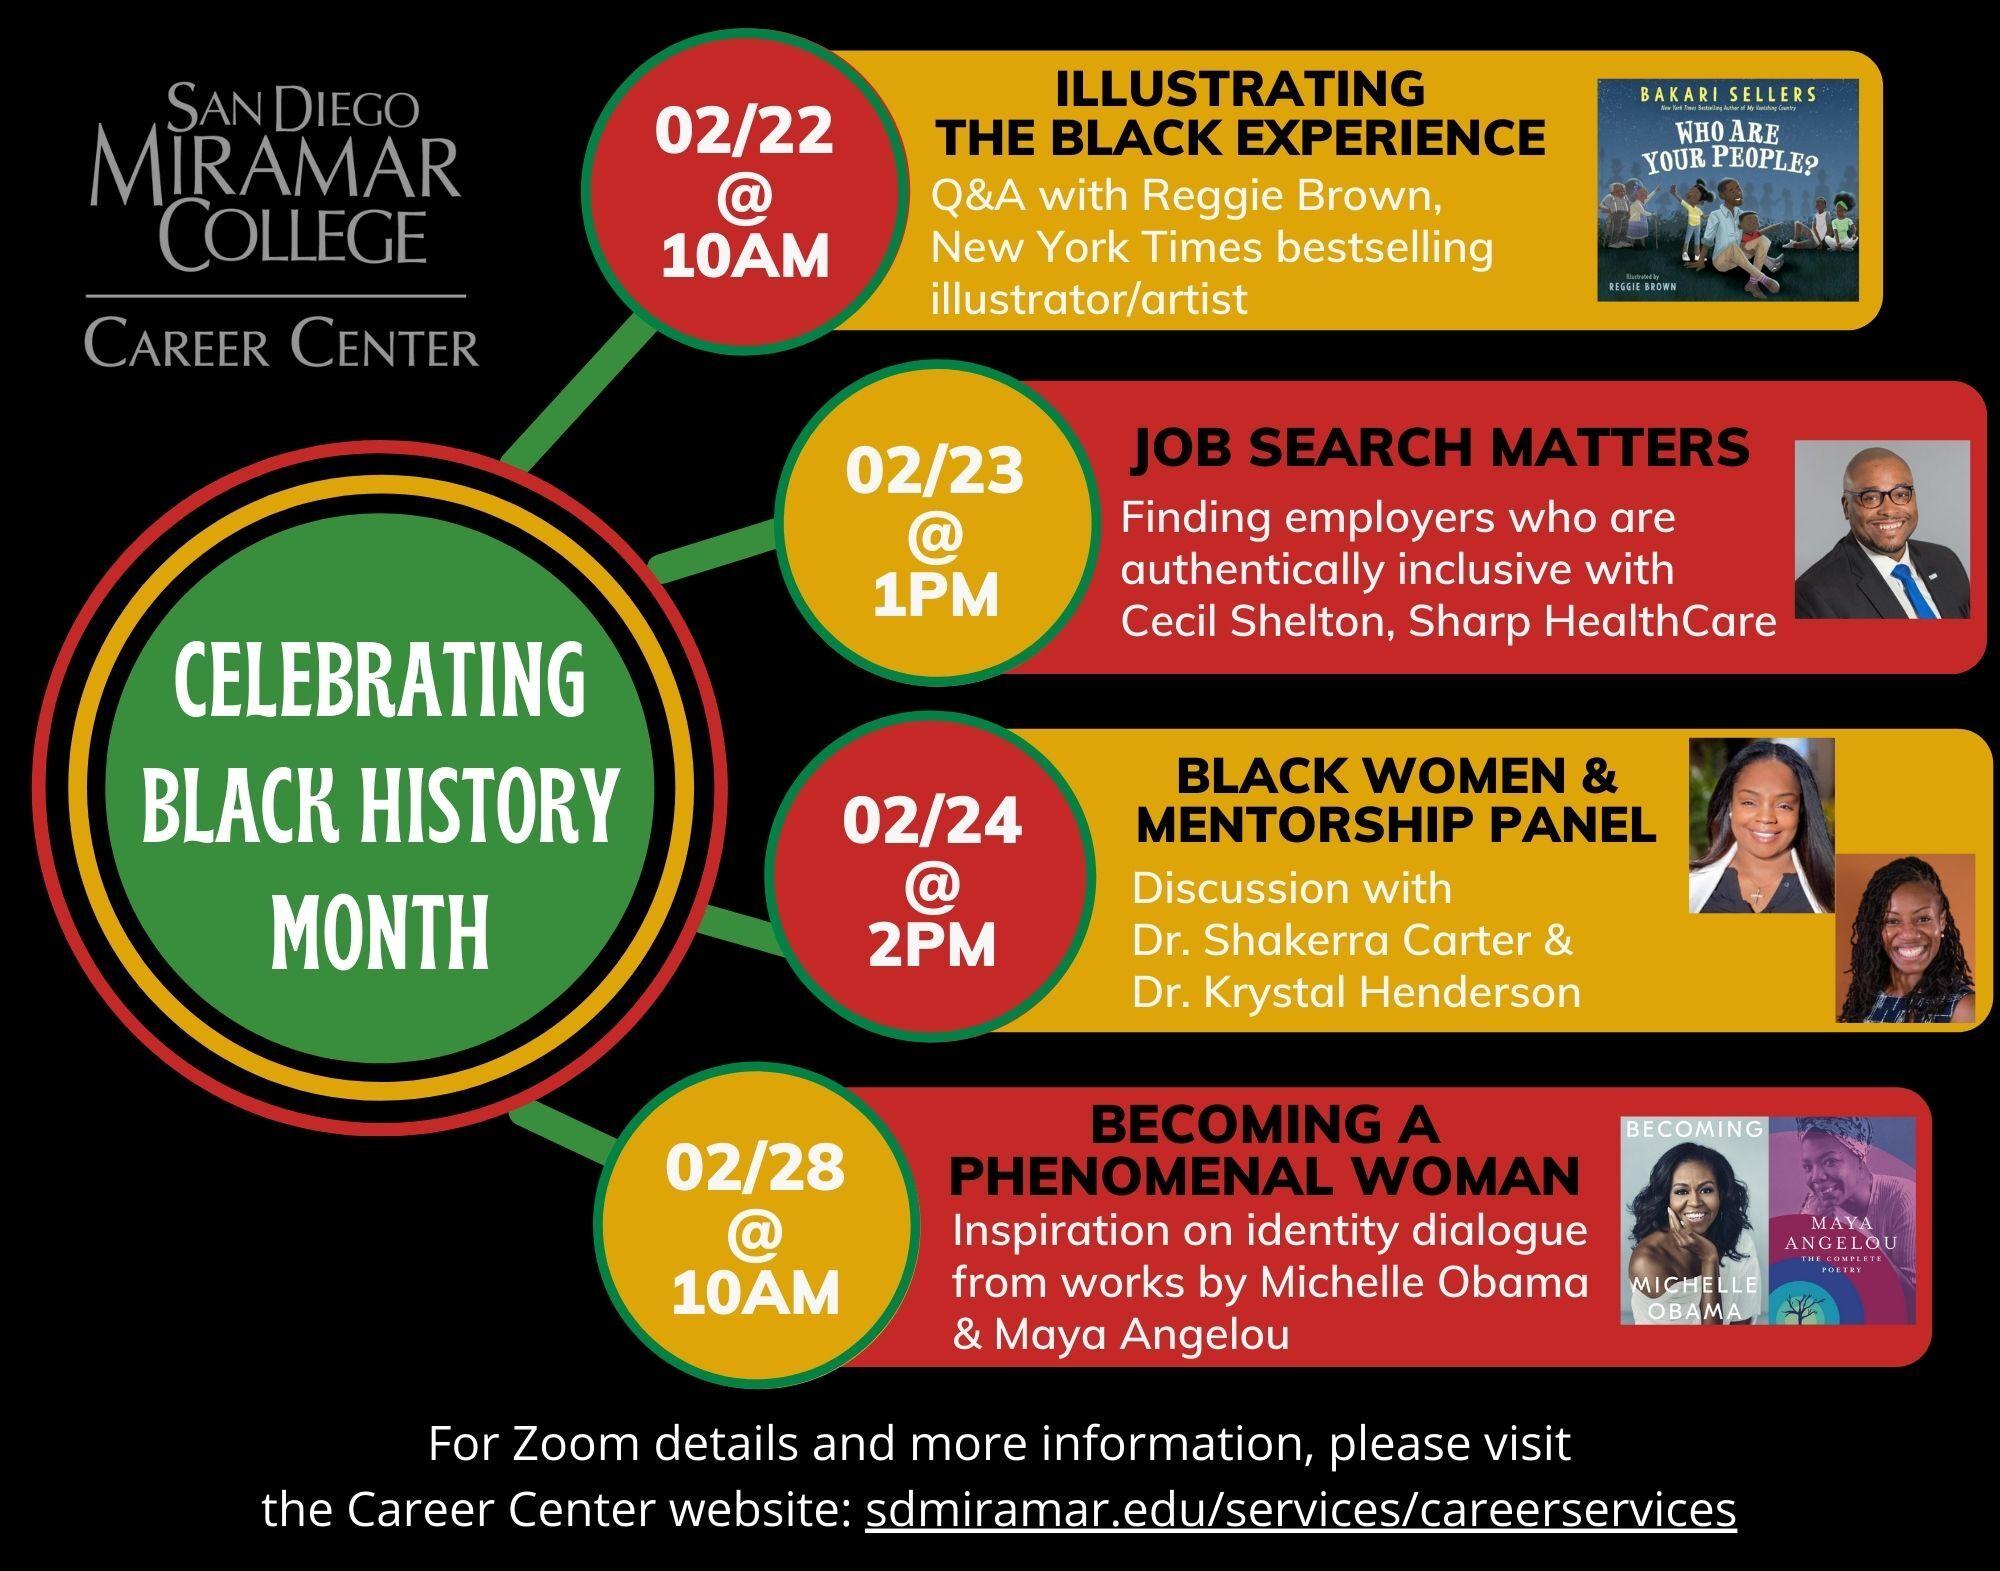 Career Center Clack History Month events